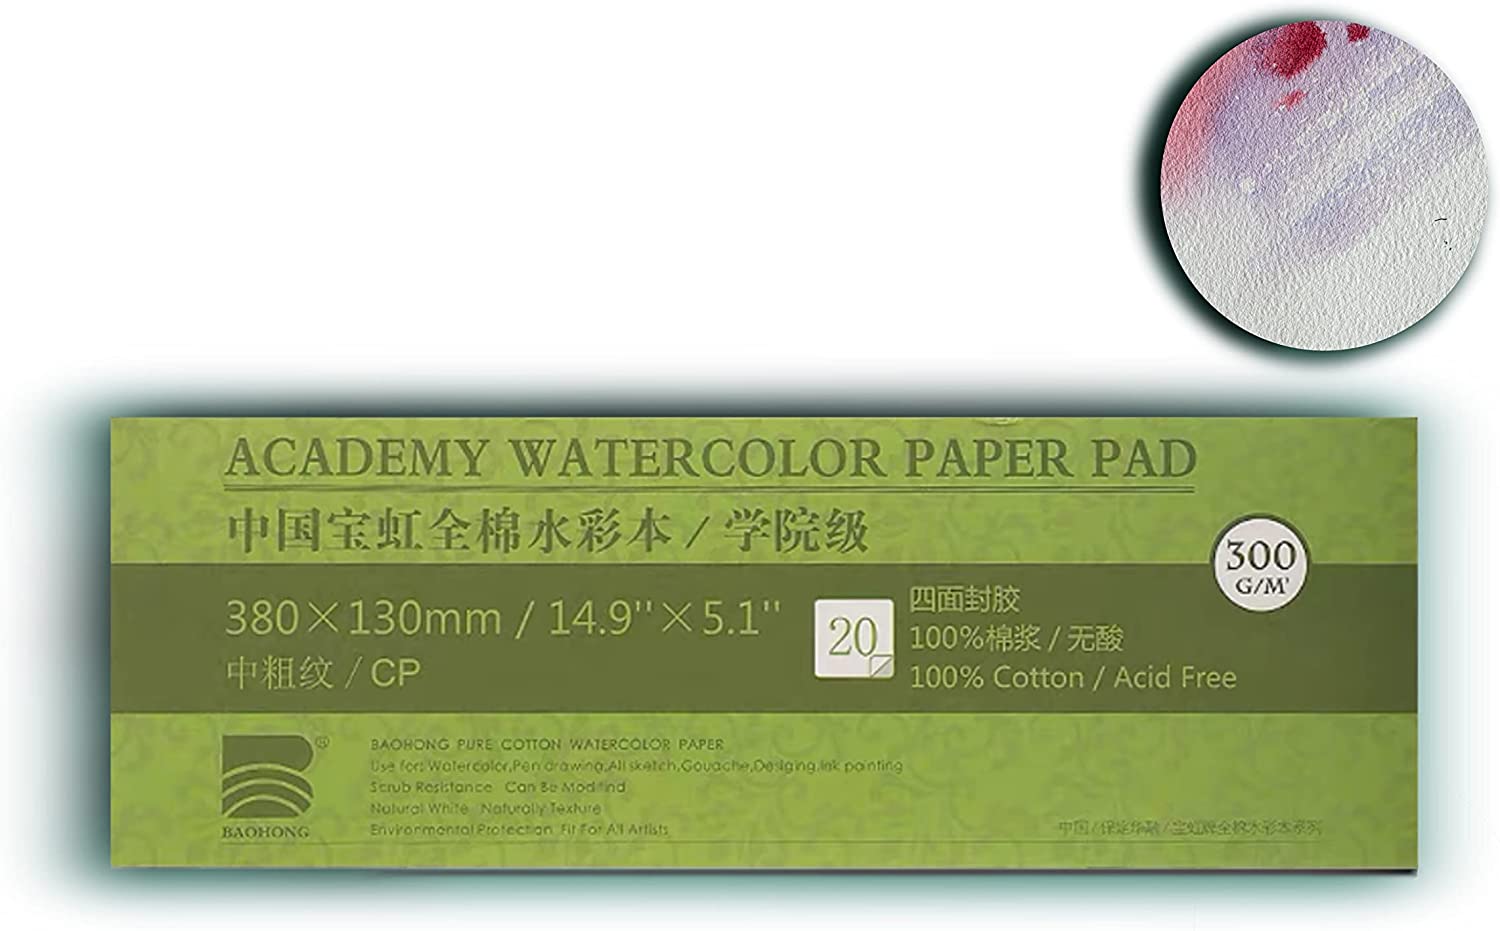 Baohong Academy Watercolor Pad Review (First Time Painting With It) 